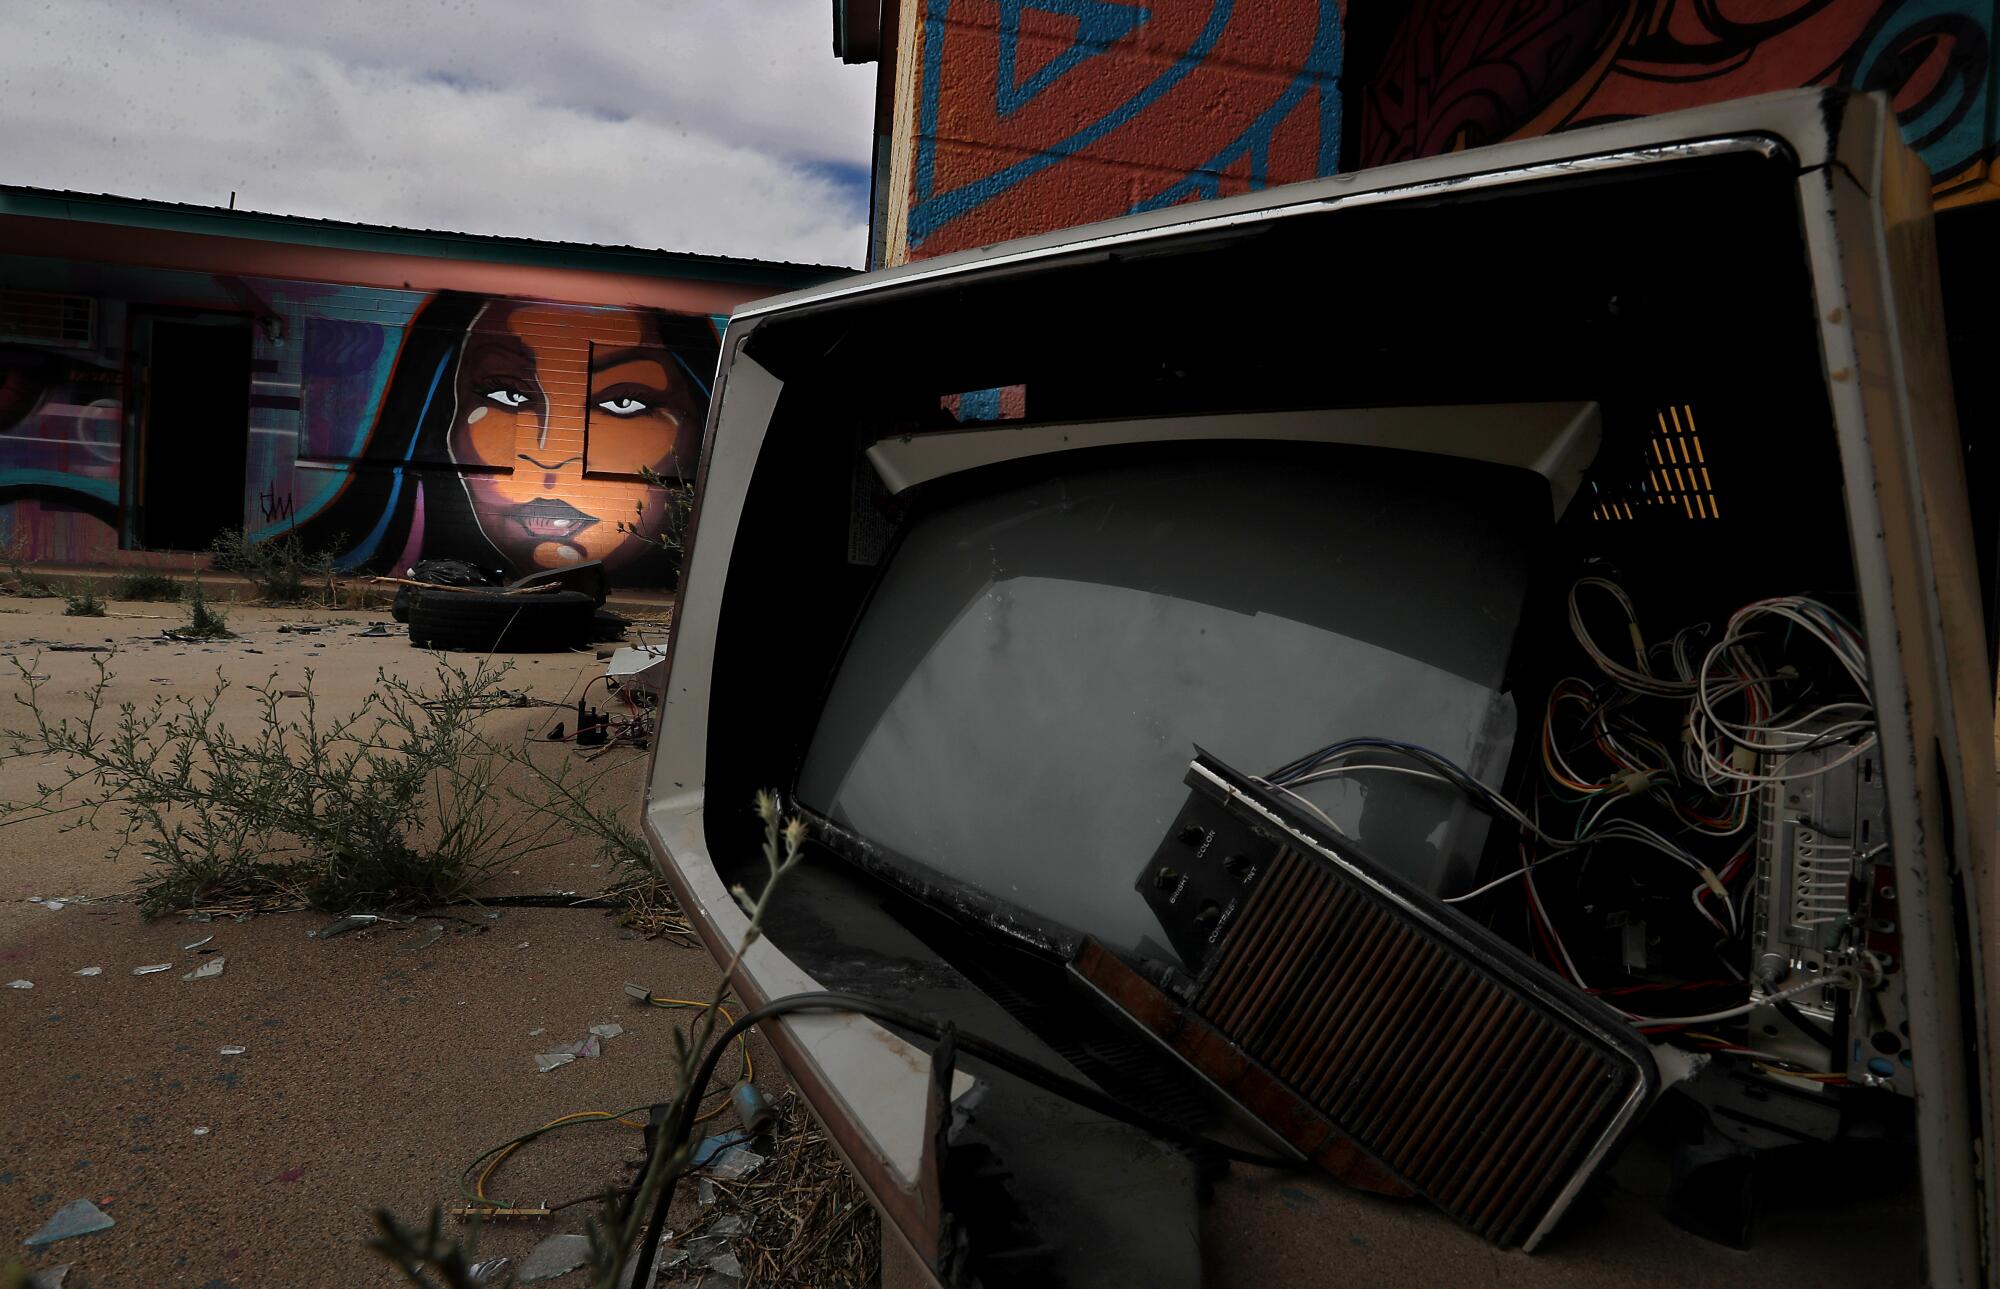 The Painted Desert Project, an art installation in an abandoned motel along Highway 89